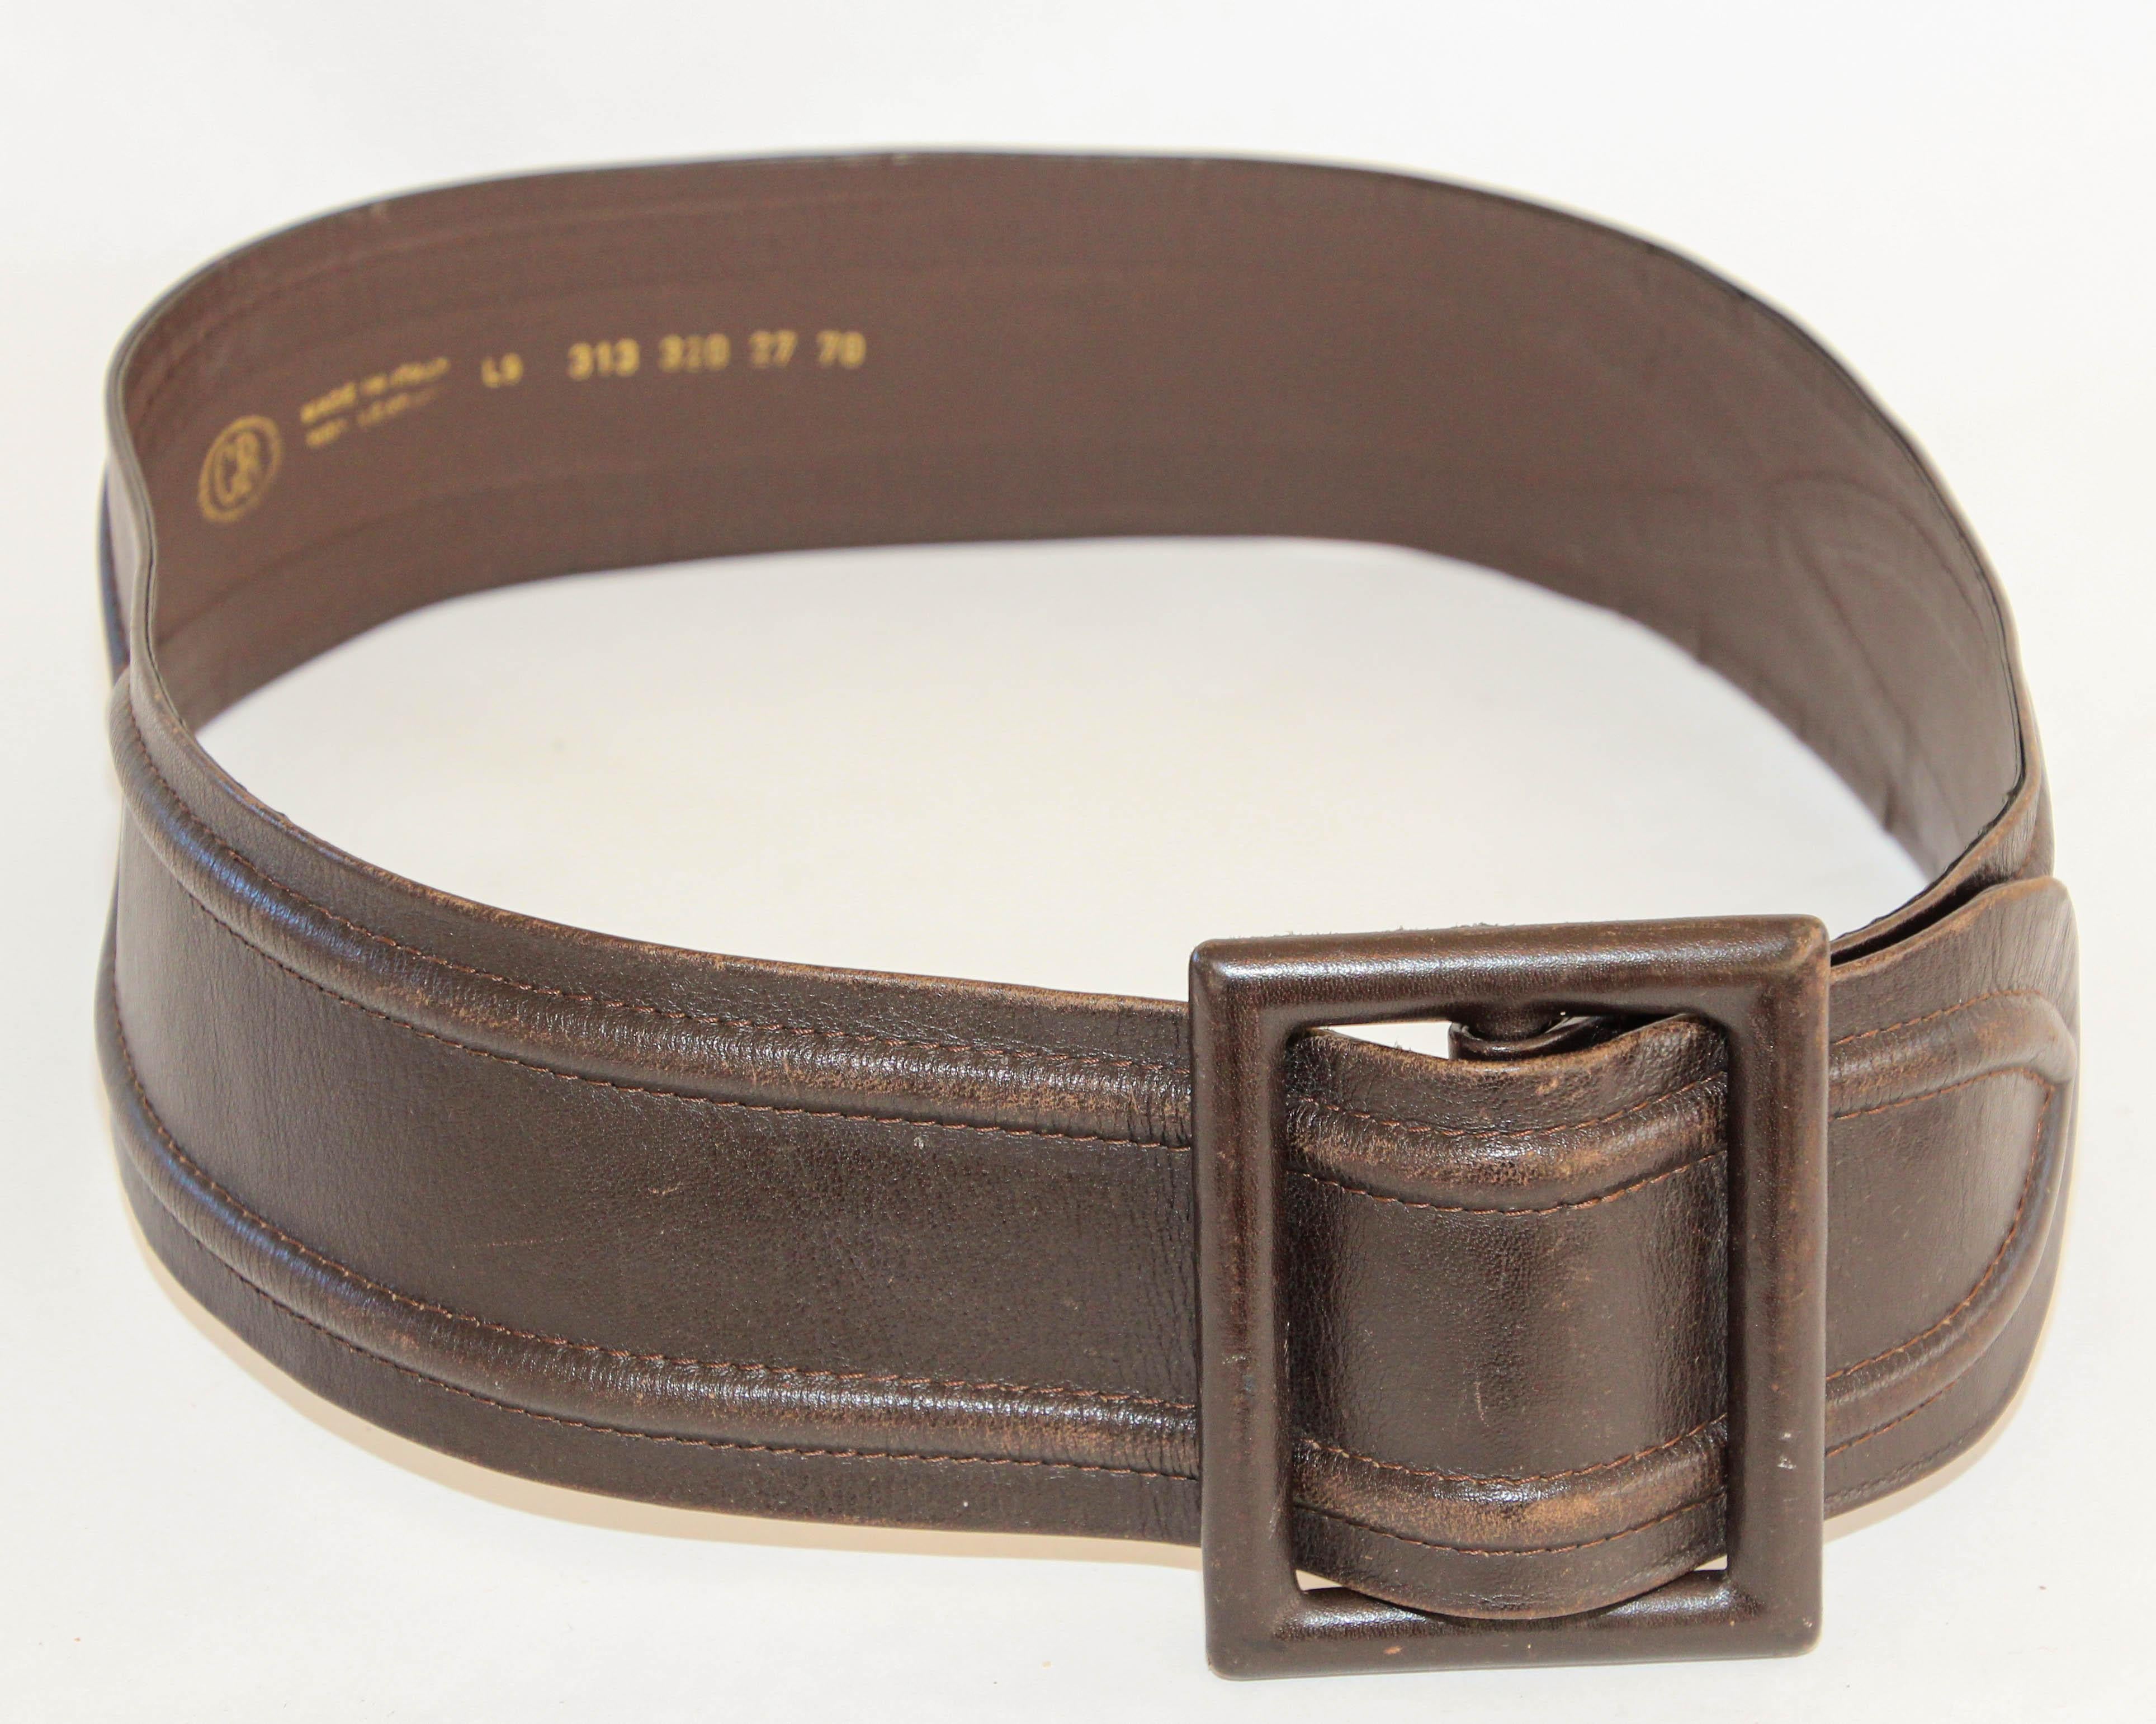 Vintage brown leather wide belt women 1980's.
The waist belt with leather buckle handmade in Italy.
Vintage over garment wide leather belt, great statement fashionable 80's style.
Various sizes possible. Marked 27 inch US or 70 cm EU.
Hallmark with